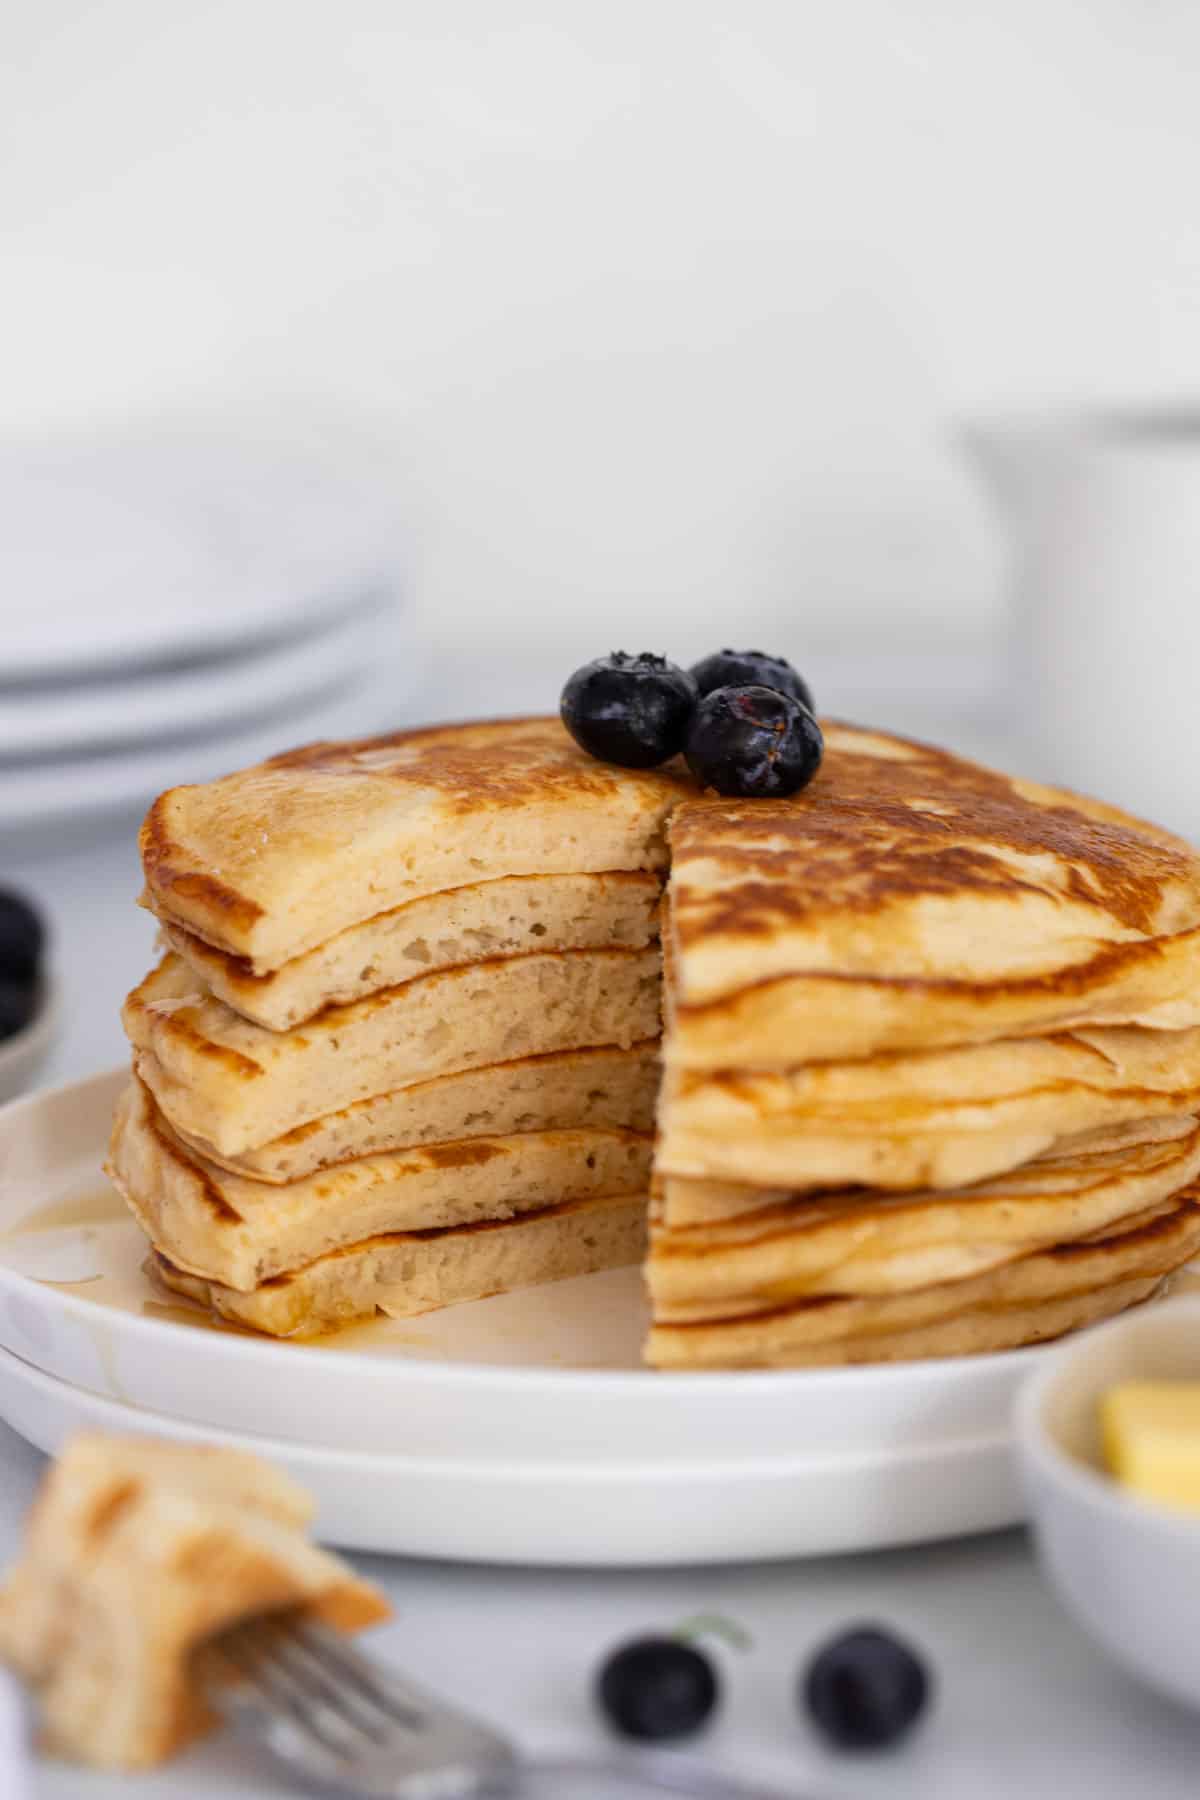 a stack of pancakes on a plate. There is a wedge cut out of the middle.